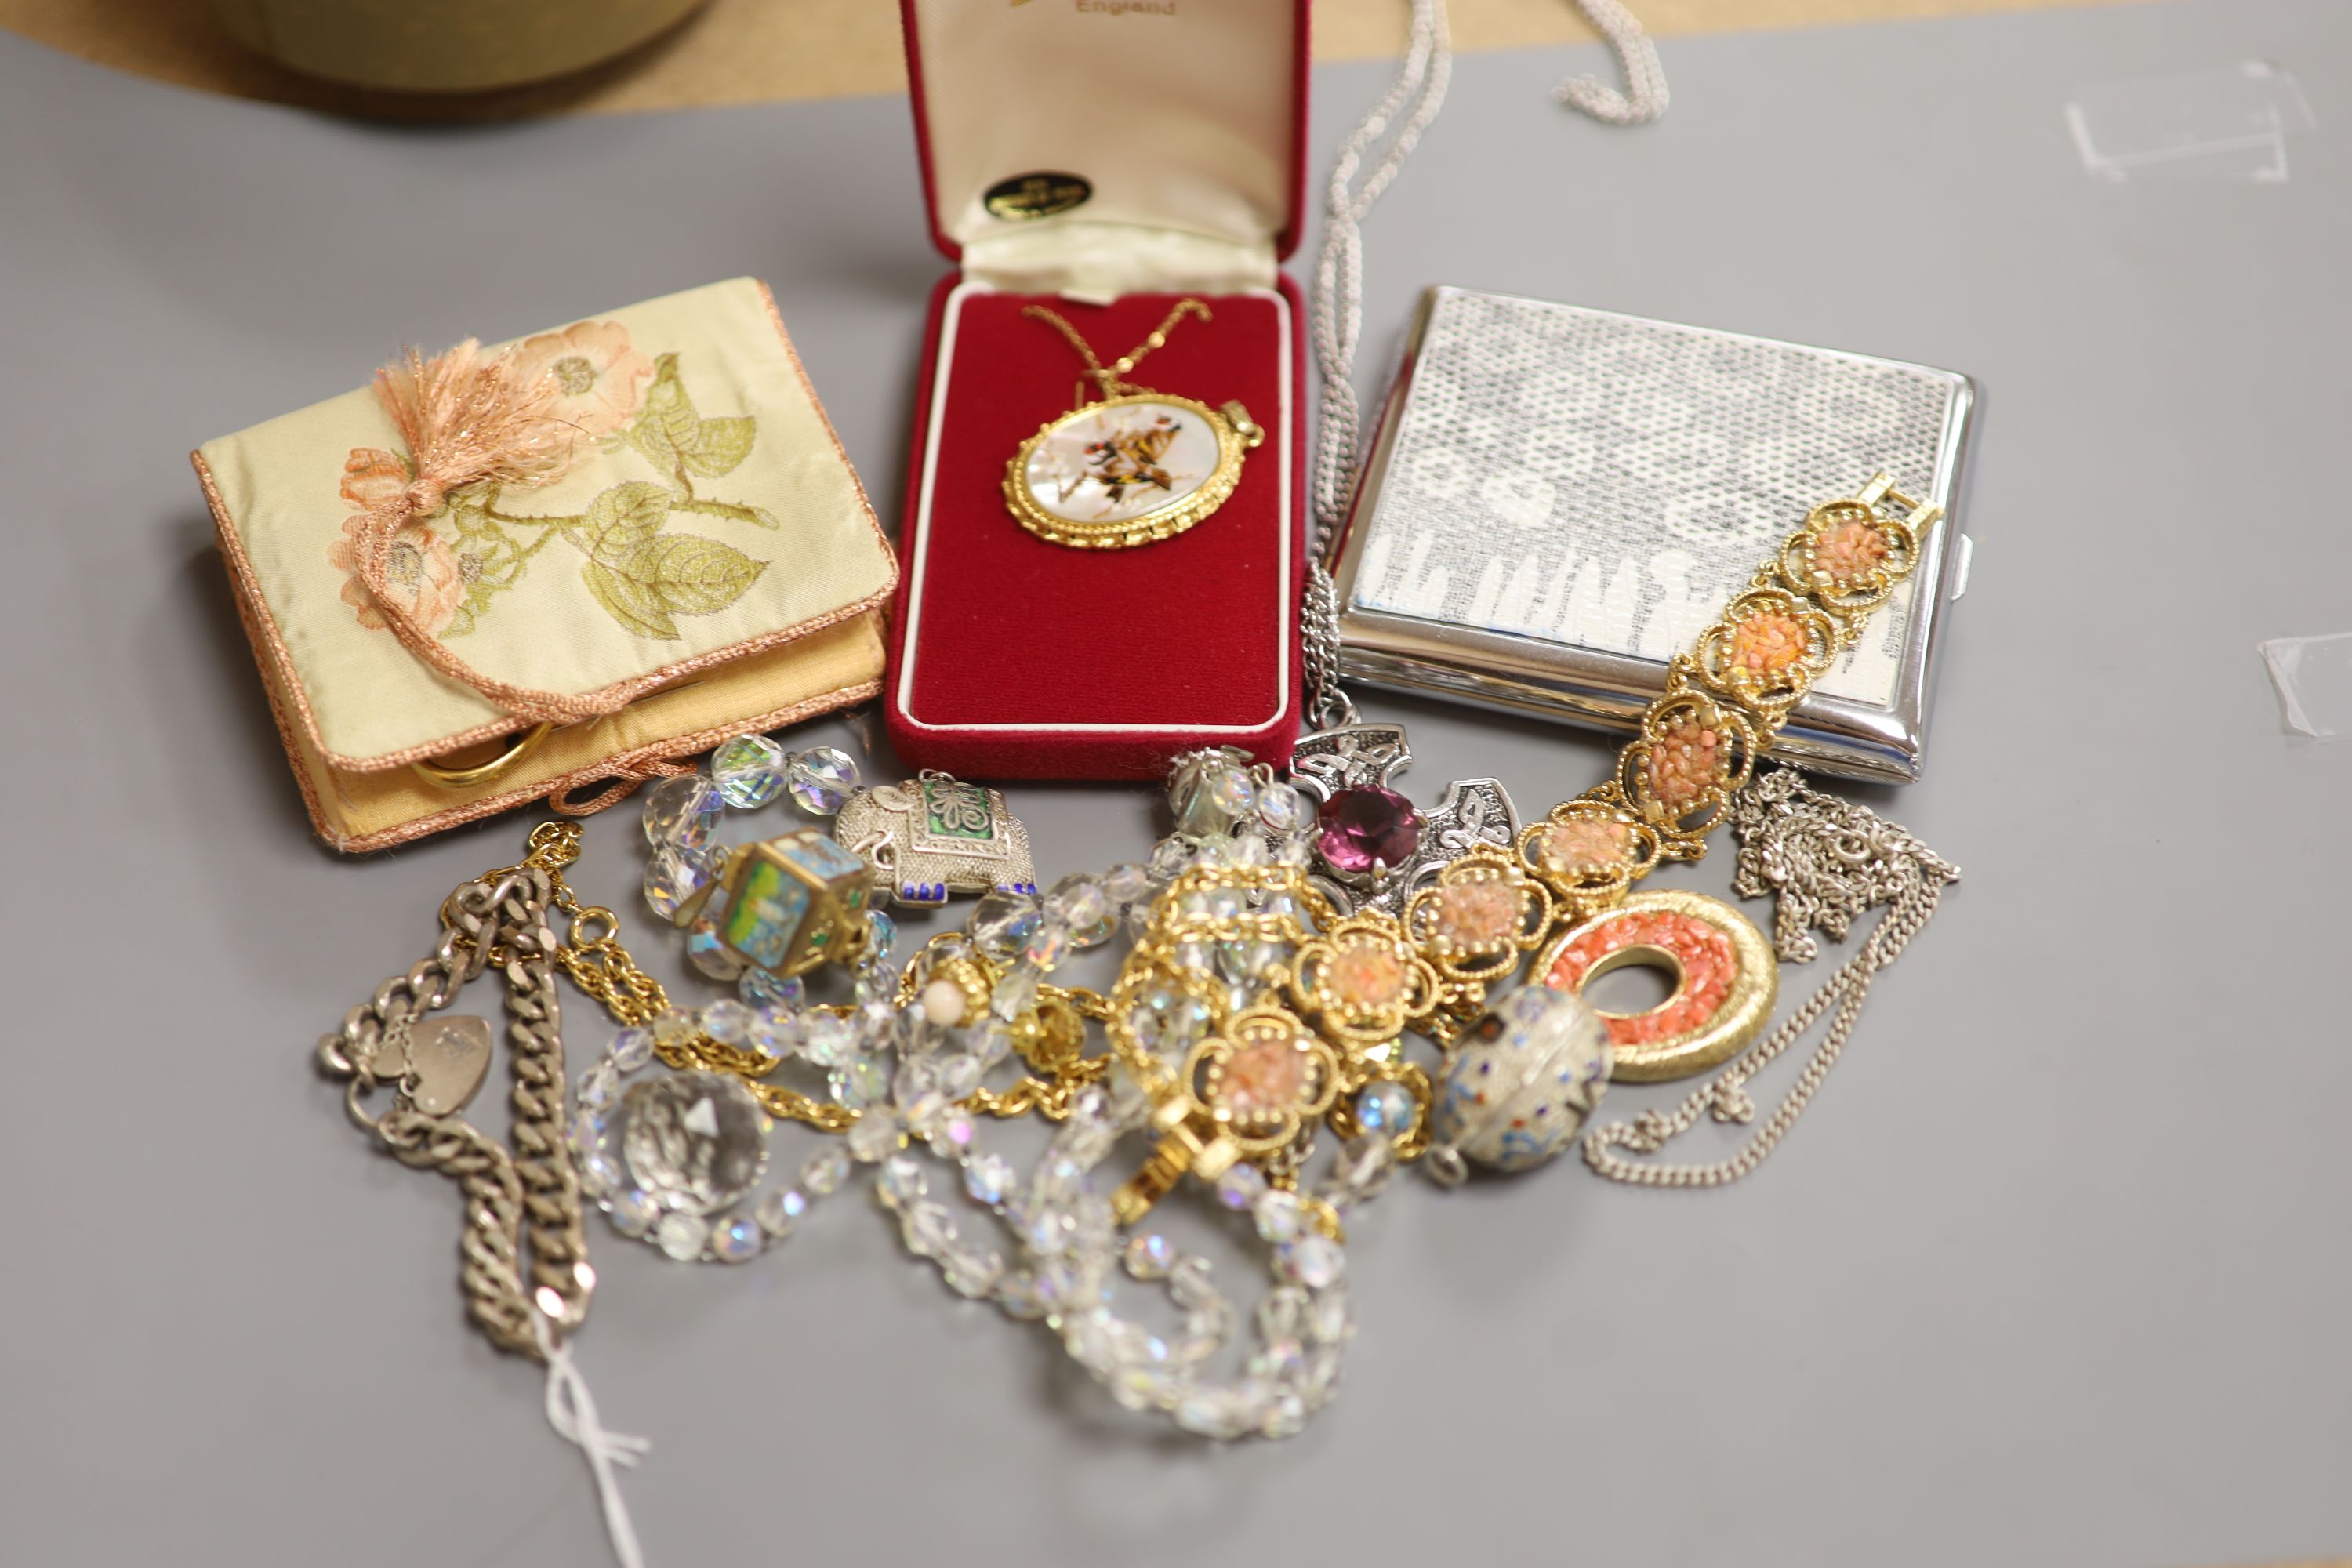 Mixed jewellery including silver bracelet, costume jewellery and a cigarette case.